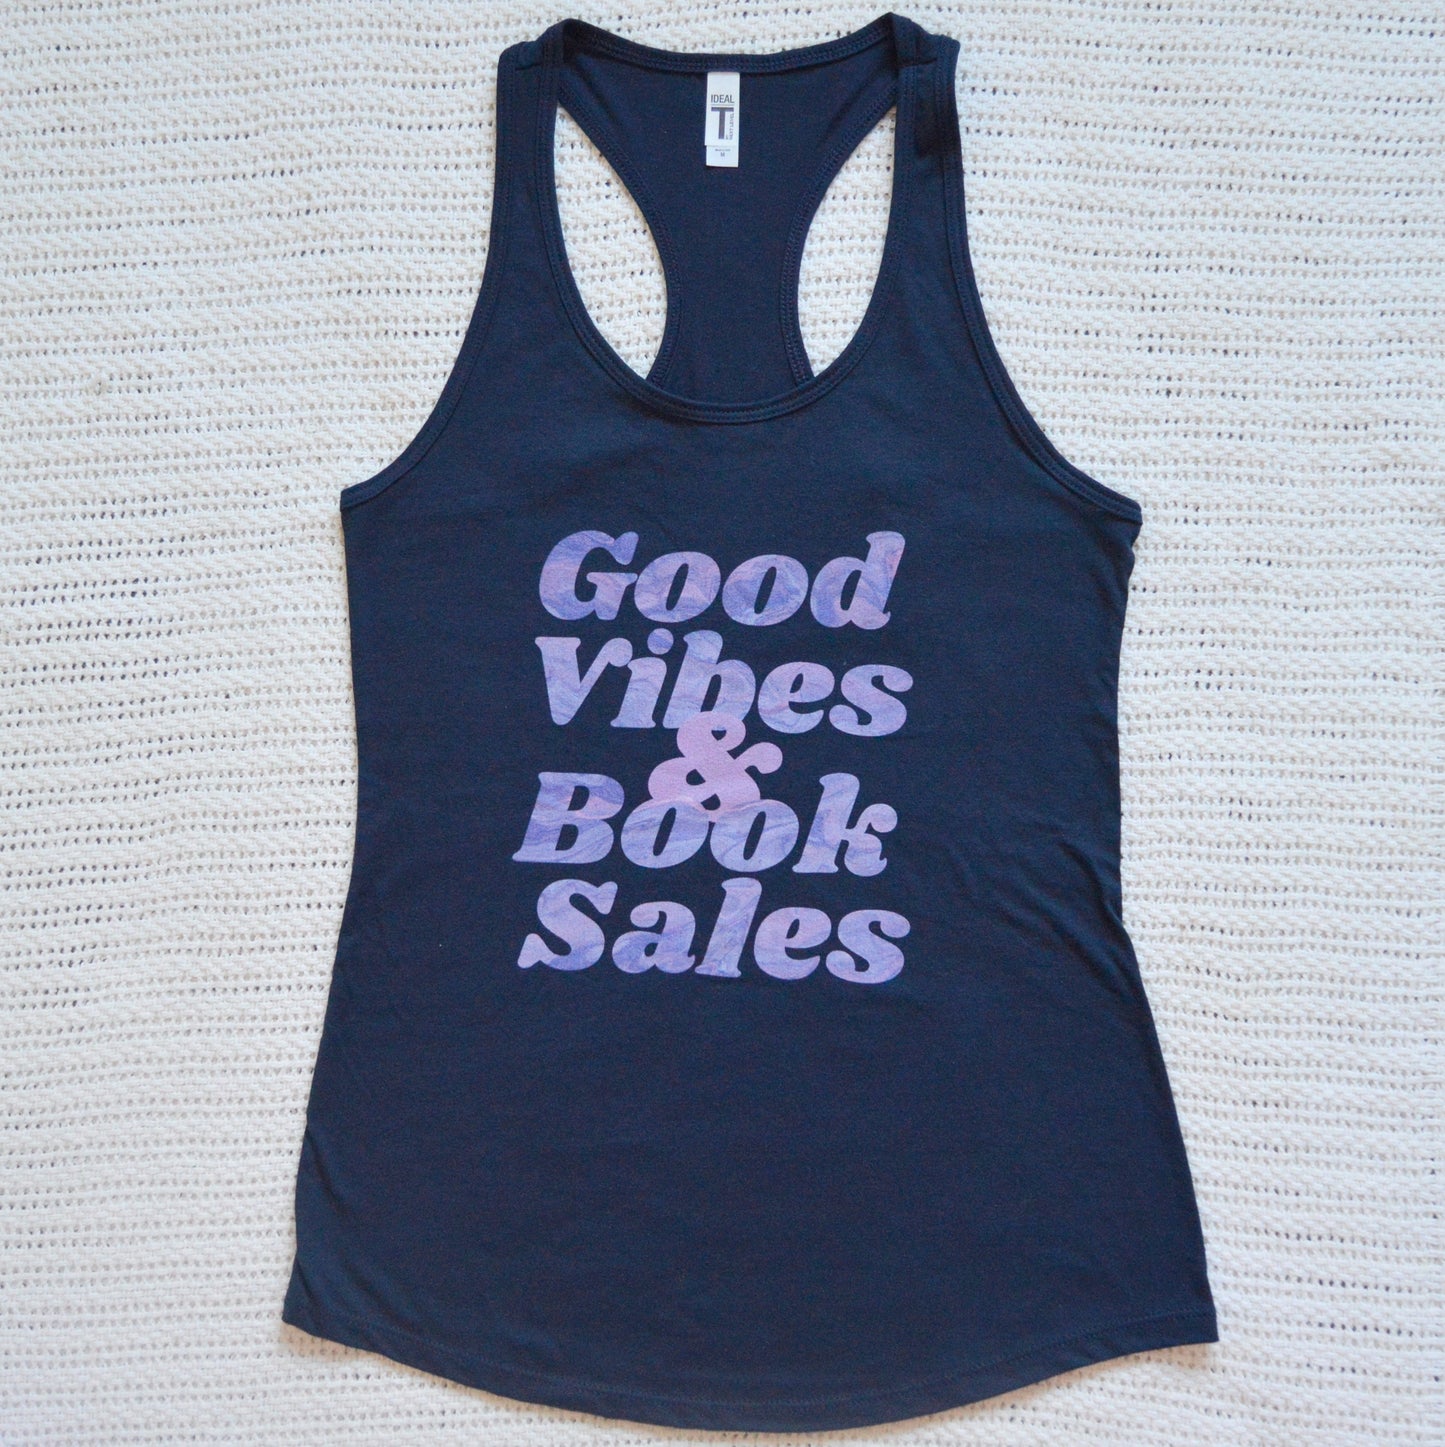 Good Vibes and Book Sales - Slim Fit Bookish Racerback Tank Top